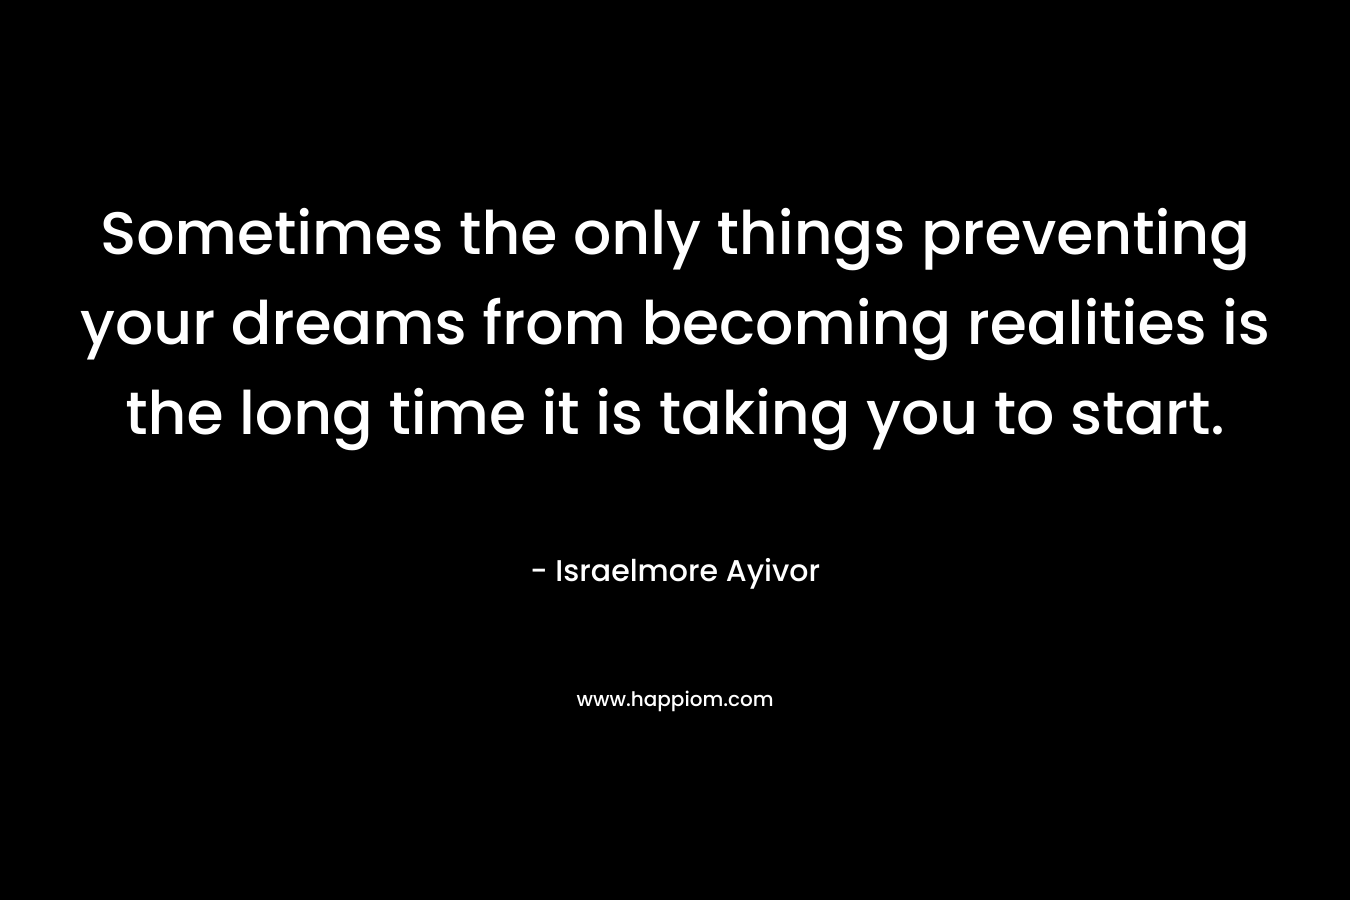 Sometimes the only things preventing your dreams from becoming realities is the long time it is taking you to start.